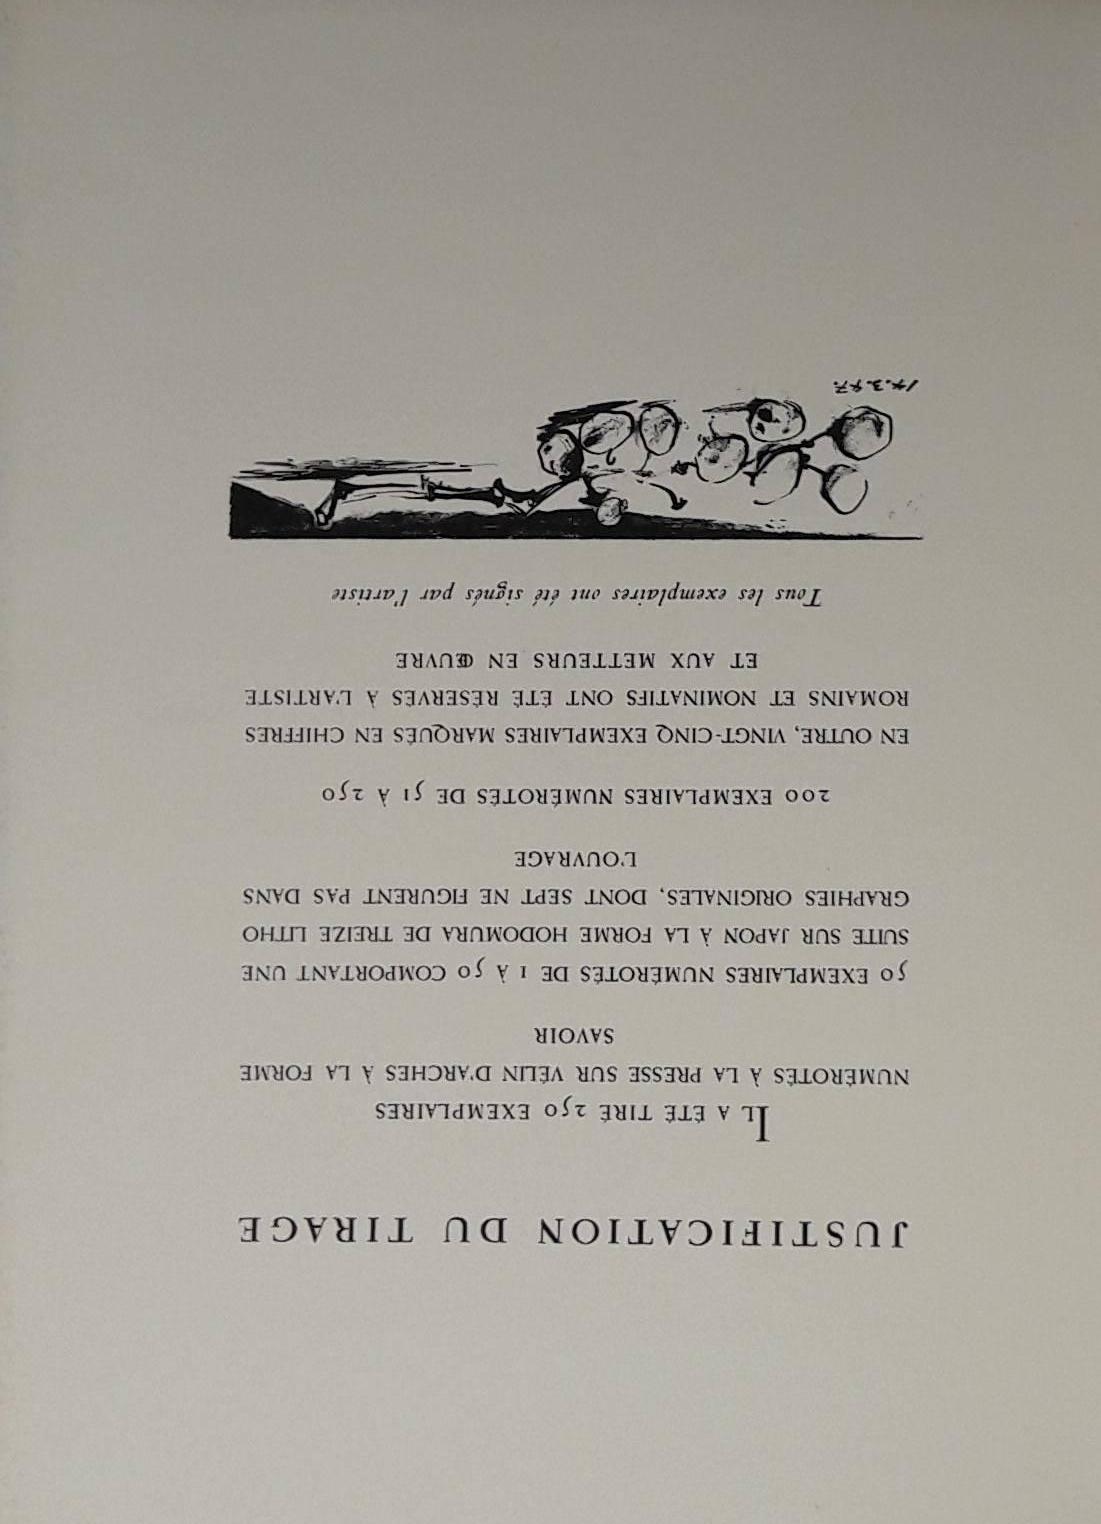 Pablo PICASSO
Dans l'atelier de Picasso

Publisher : Fernand Mourlot, Paris 
Year : 1957
Text in French.
- 17,3 x 12,9 in. In leaves under illustrated cover (with 2 original lithographs) and grey clamshell case. 
- In total 6 original lithographs :